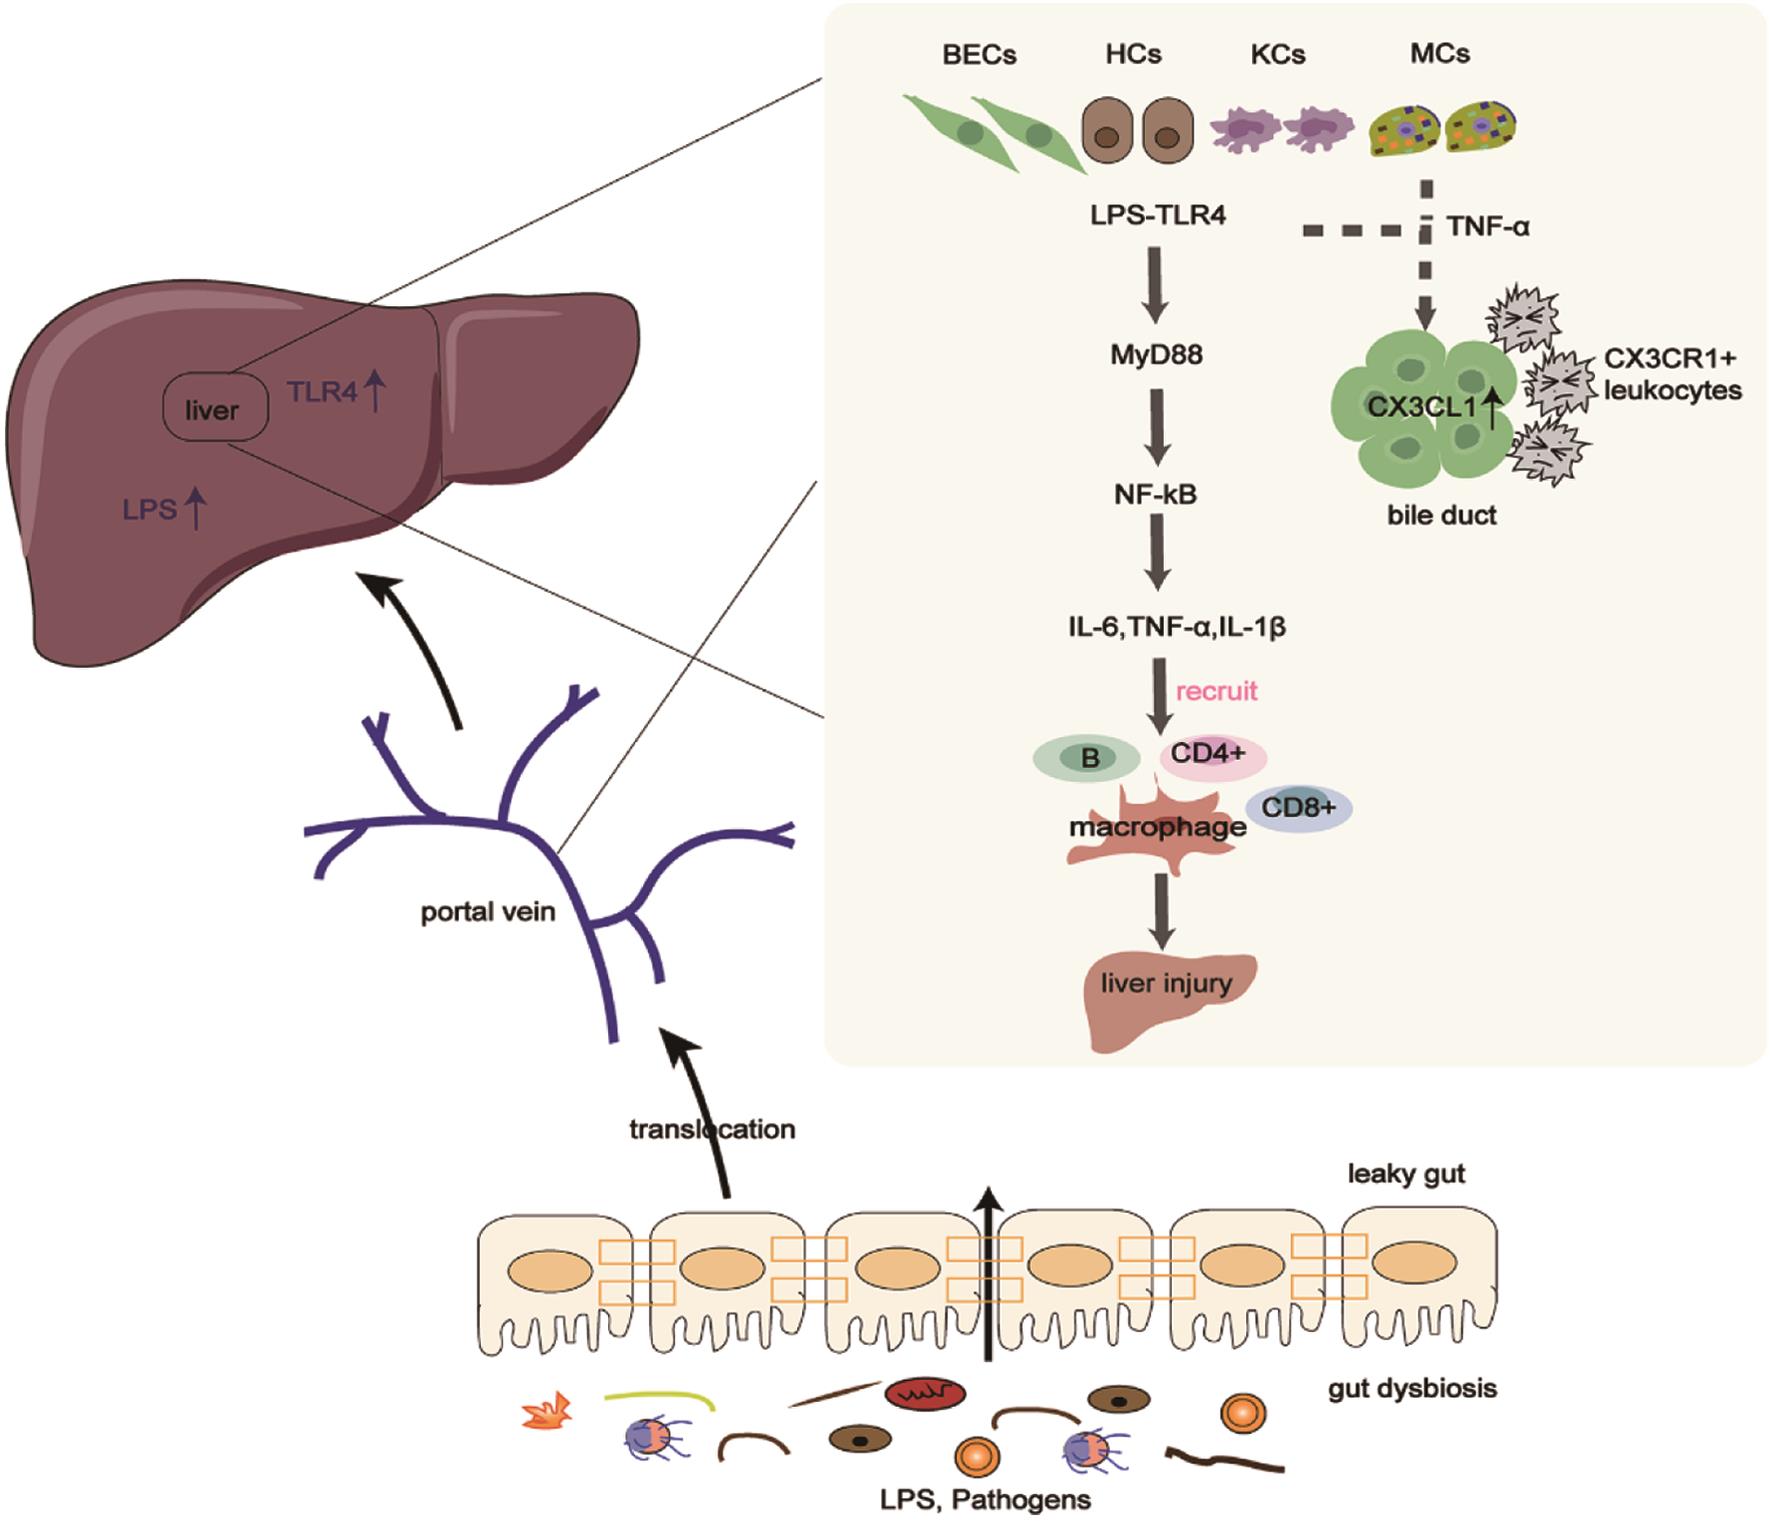 Gut microbiota contributes to the pathogenesis of PBC through the LPS/TLR4 signaling pathway.